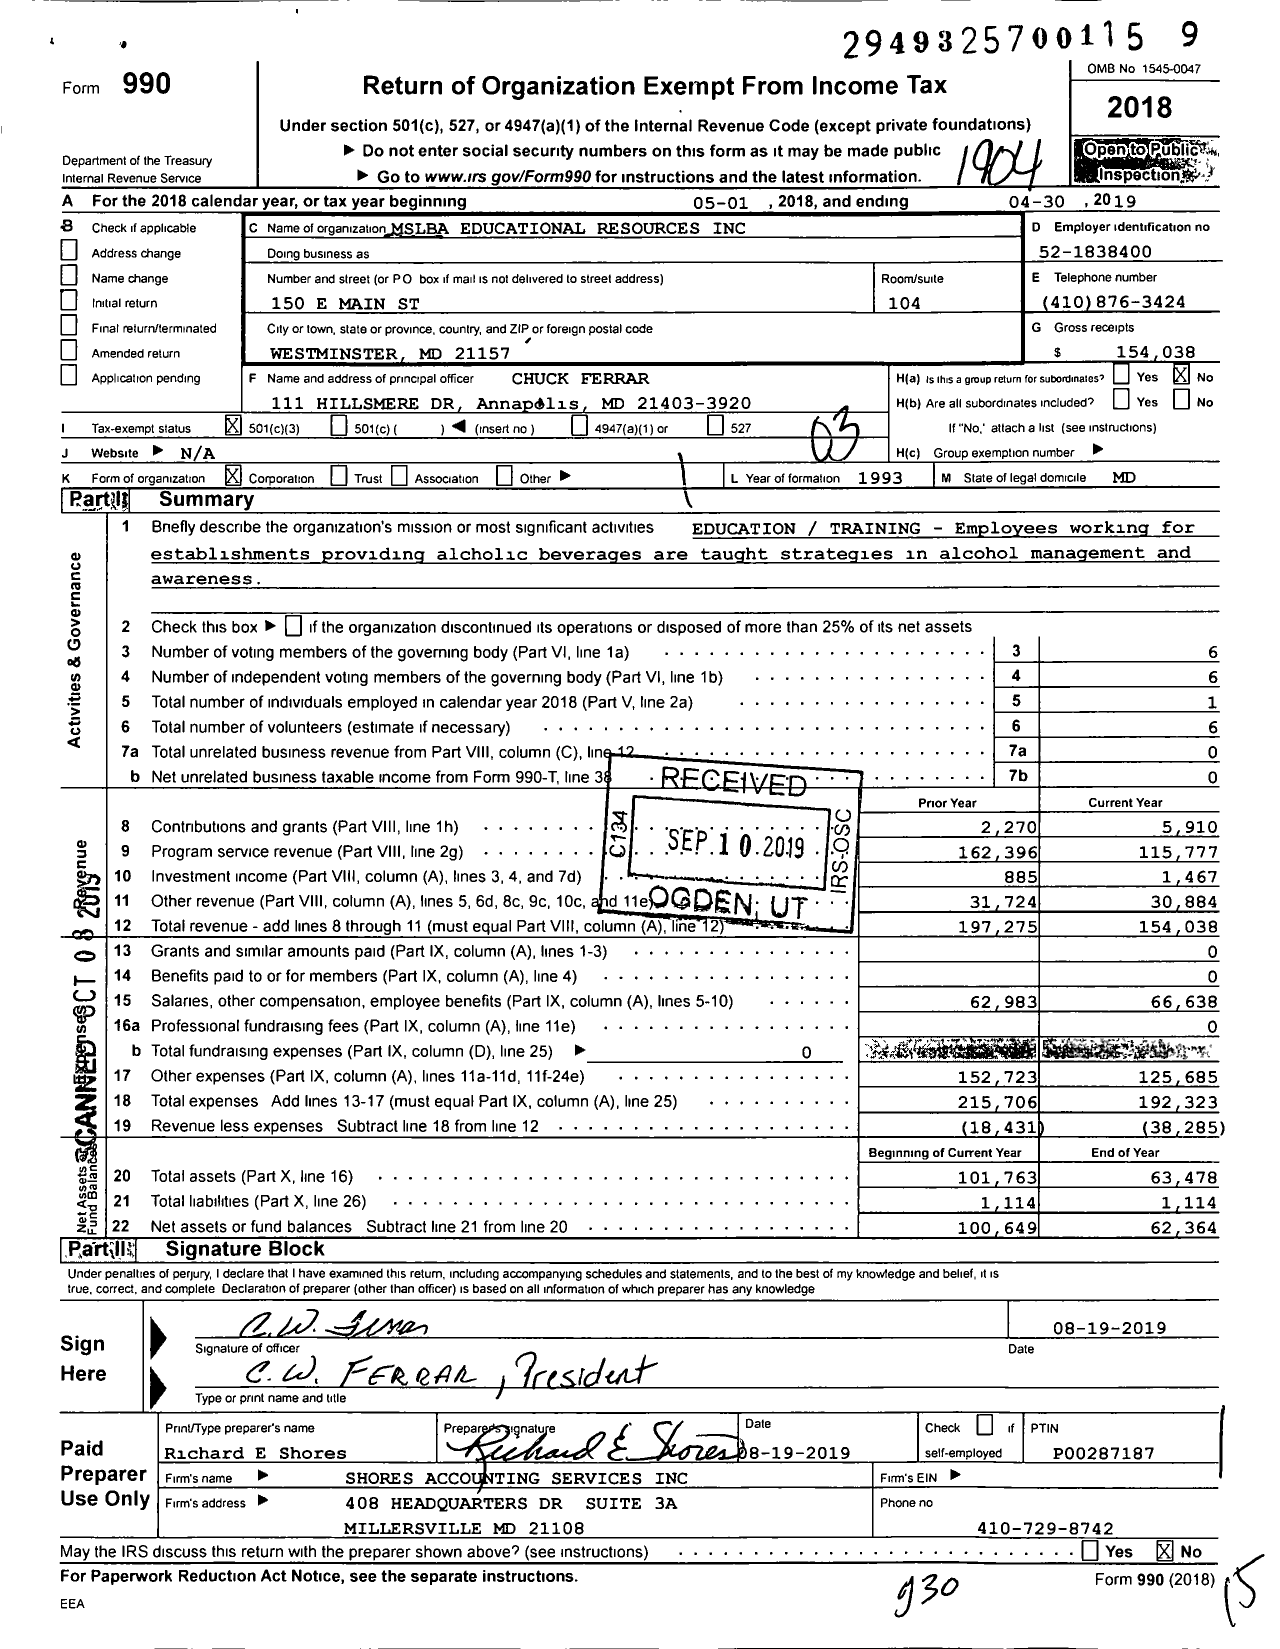 Image of first page of 2018 Form 990 for Mslba Educational Resources